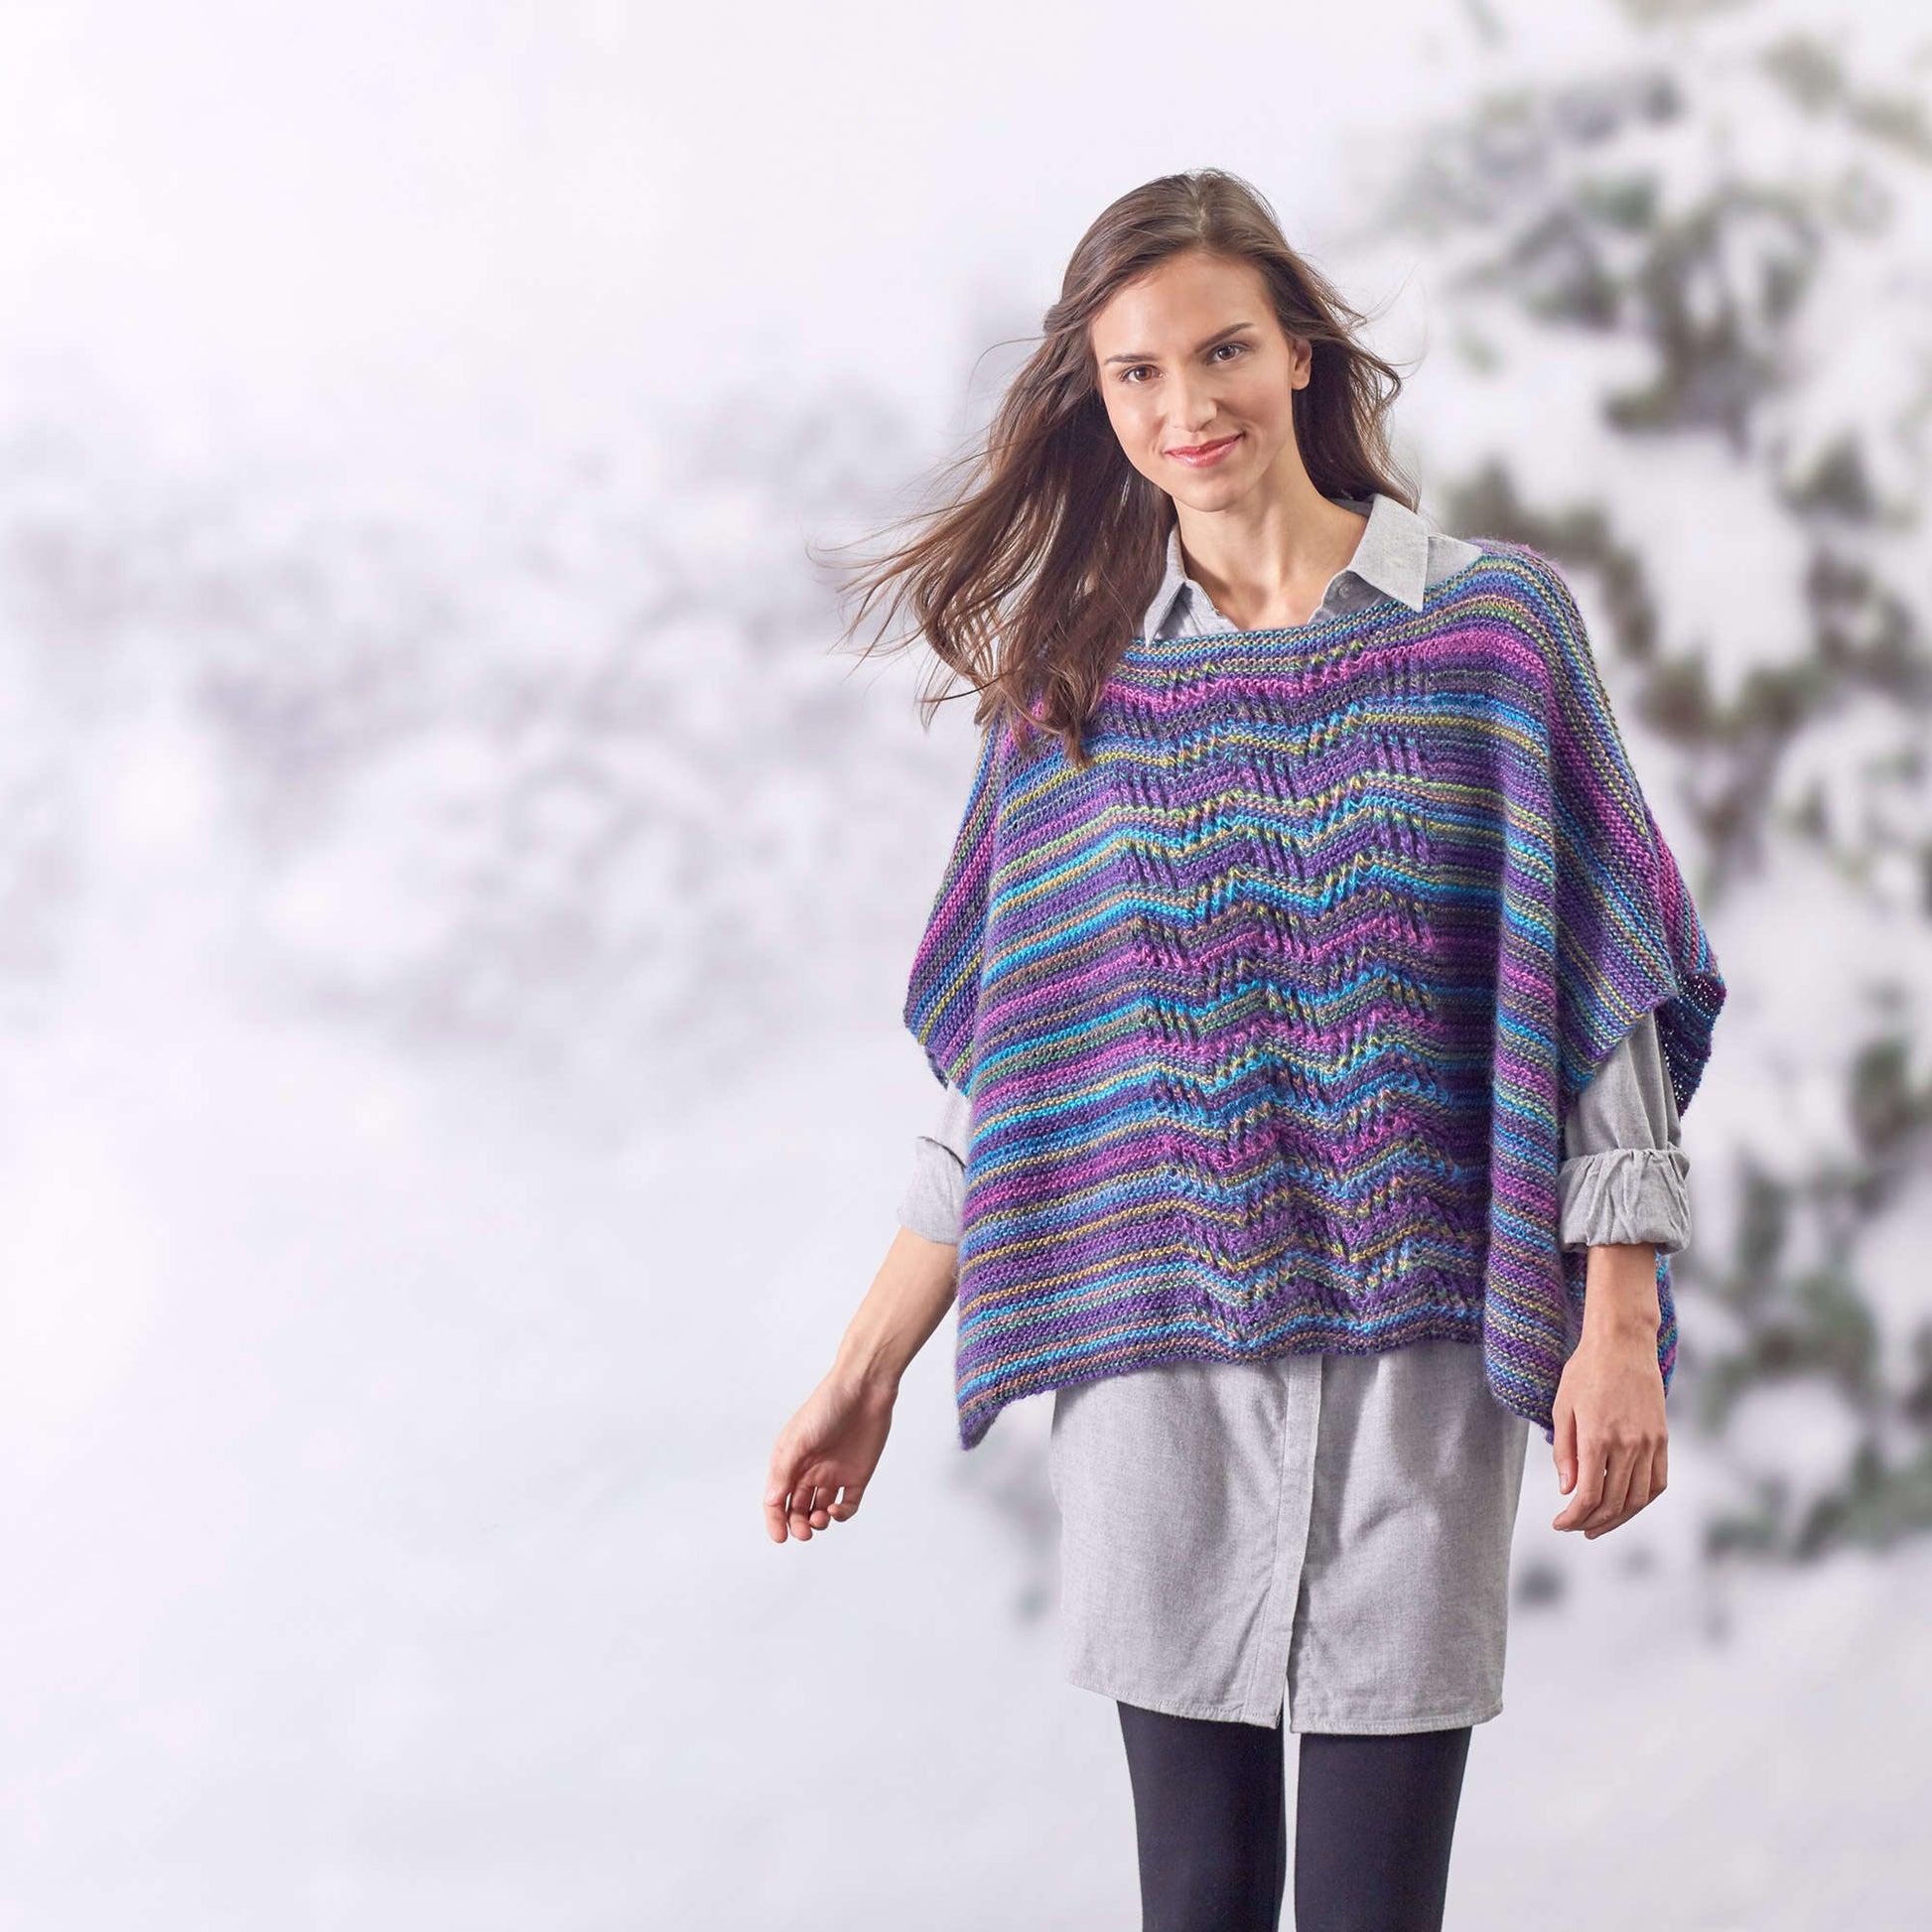 Free Red Heart Lace Panel Knit Poncho Pattern